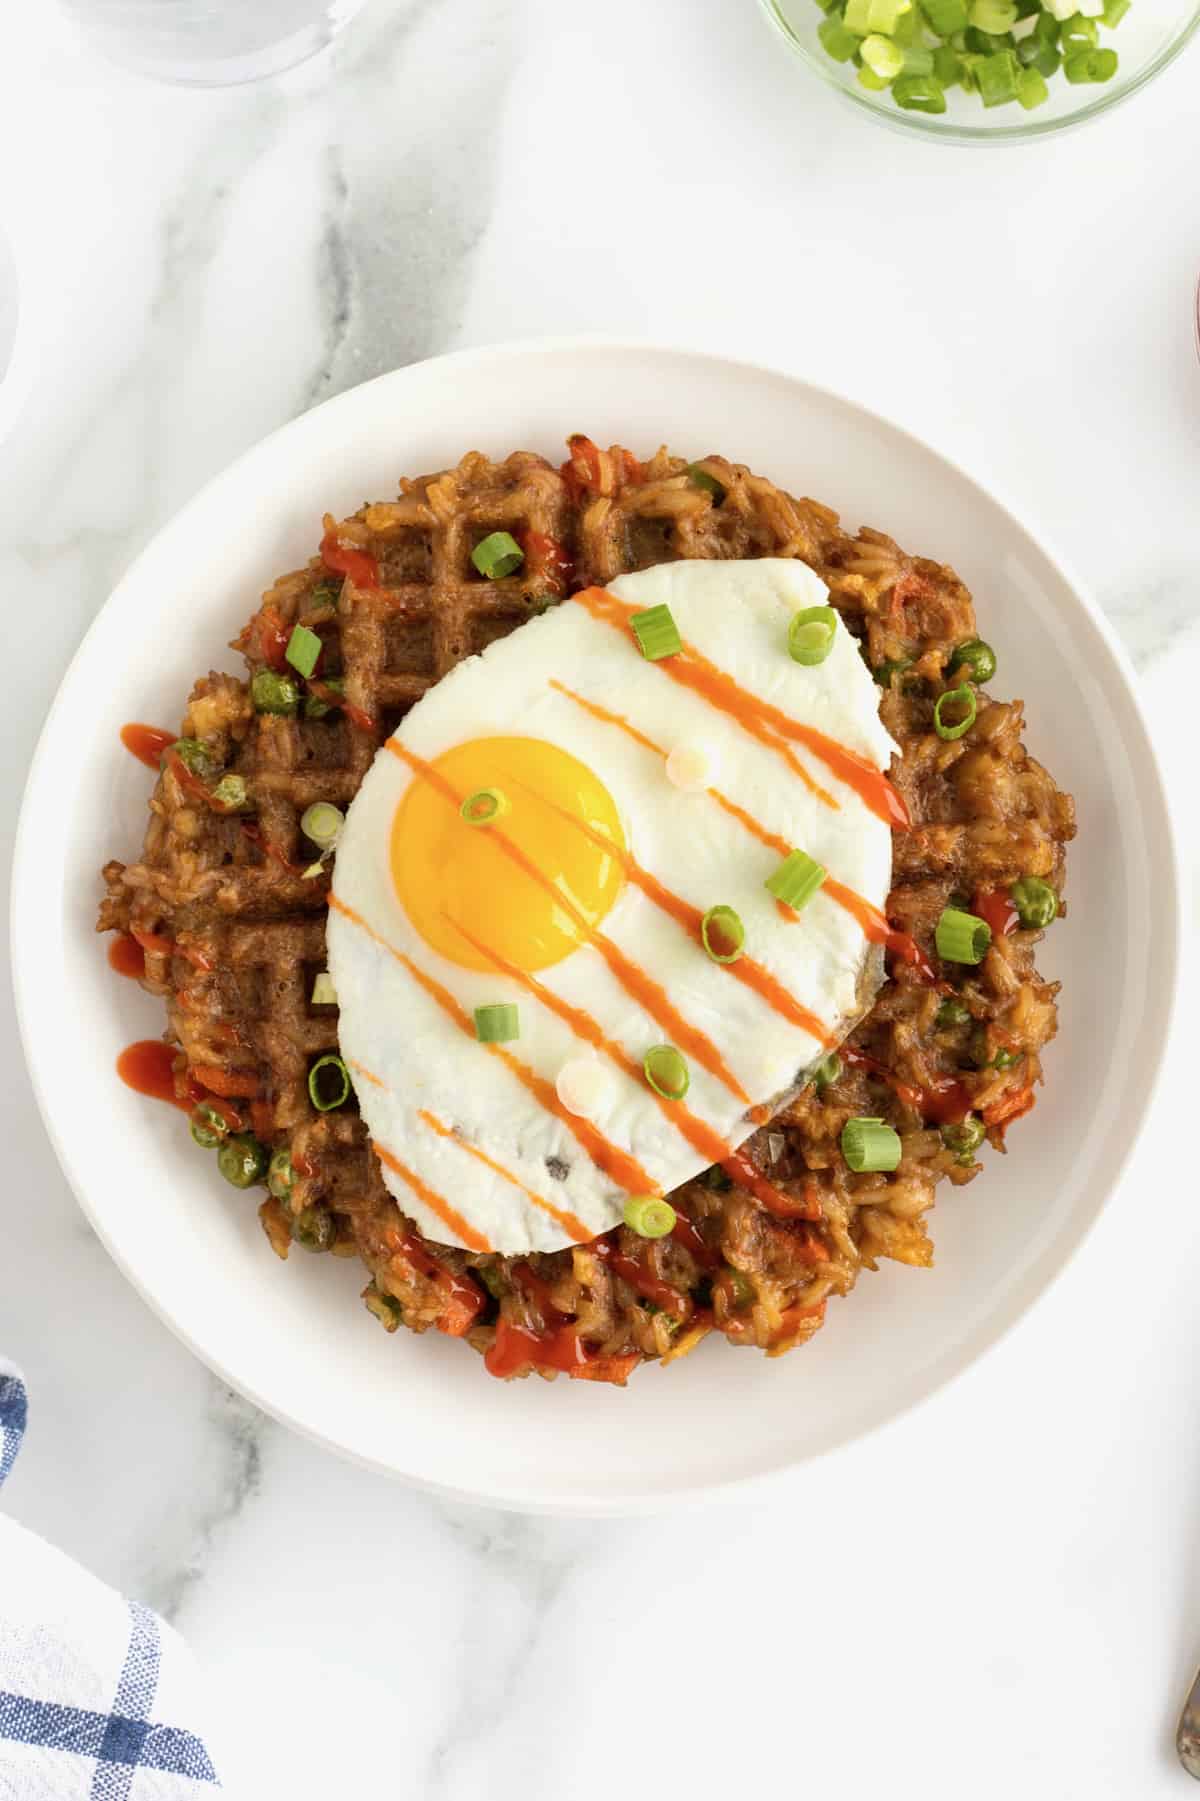 A sunny side up egg on to p of a fried rice waffle on a white ceramic plate sprinkled with chopped green onions.